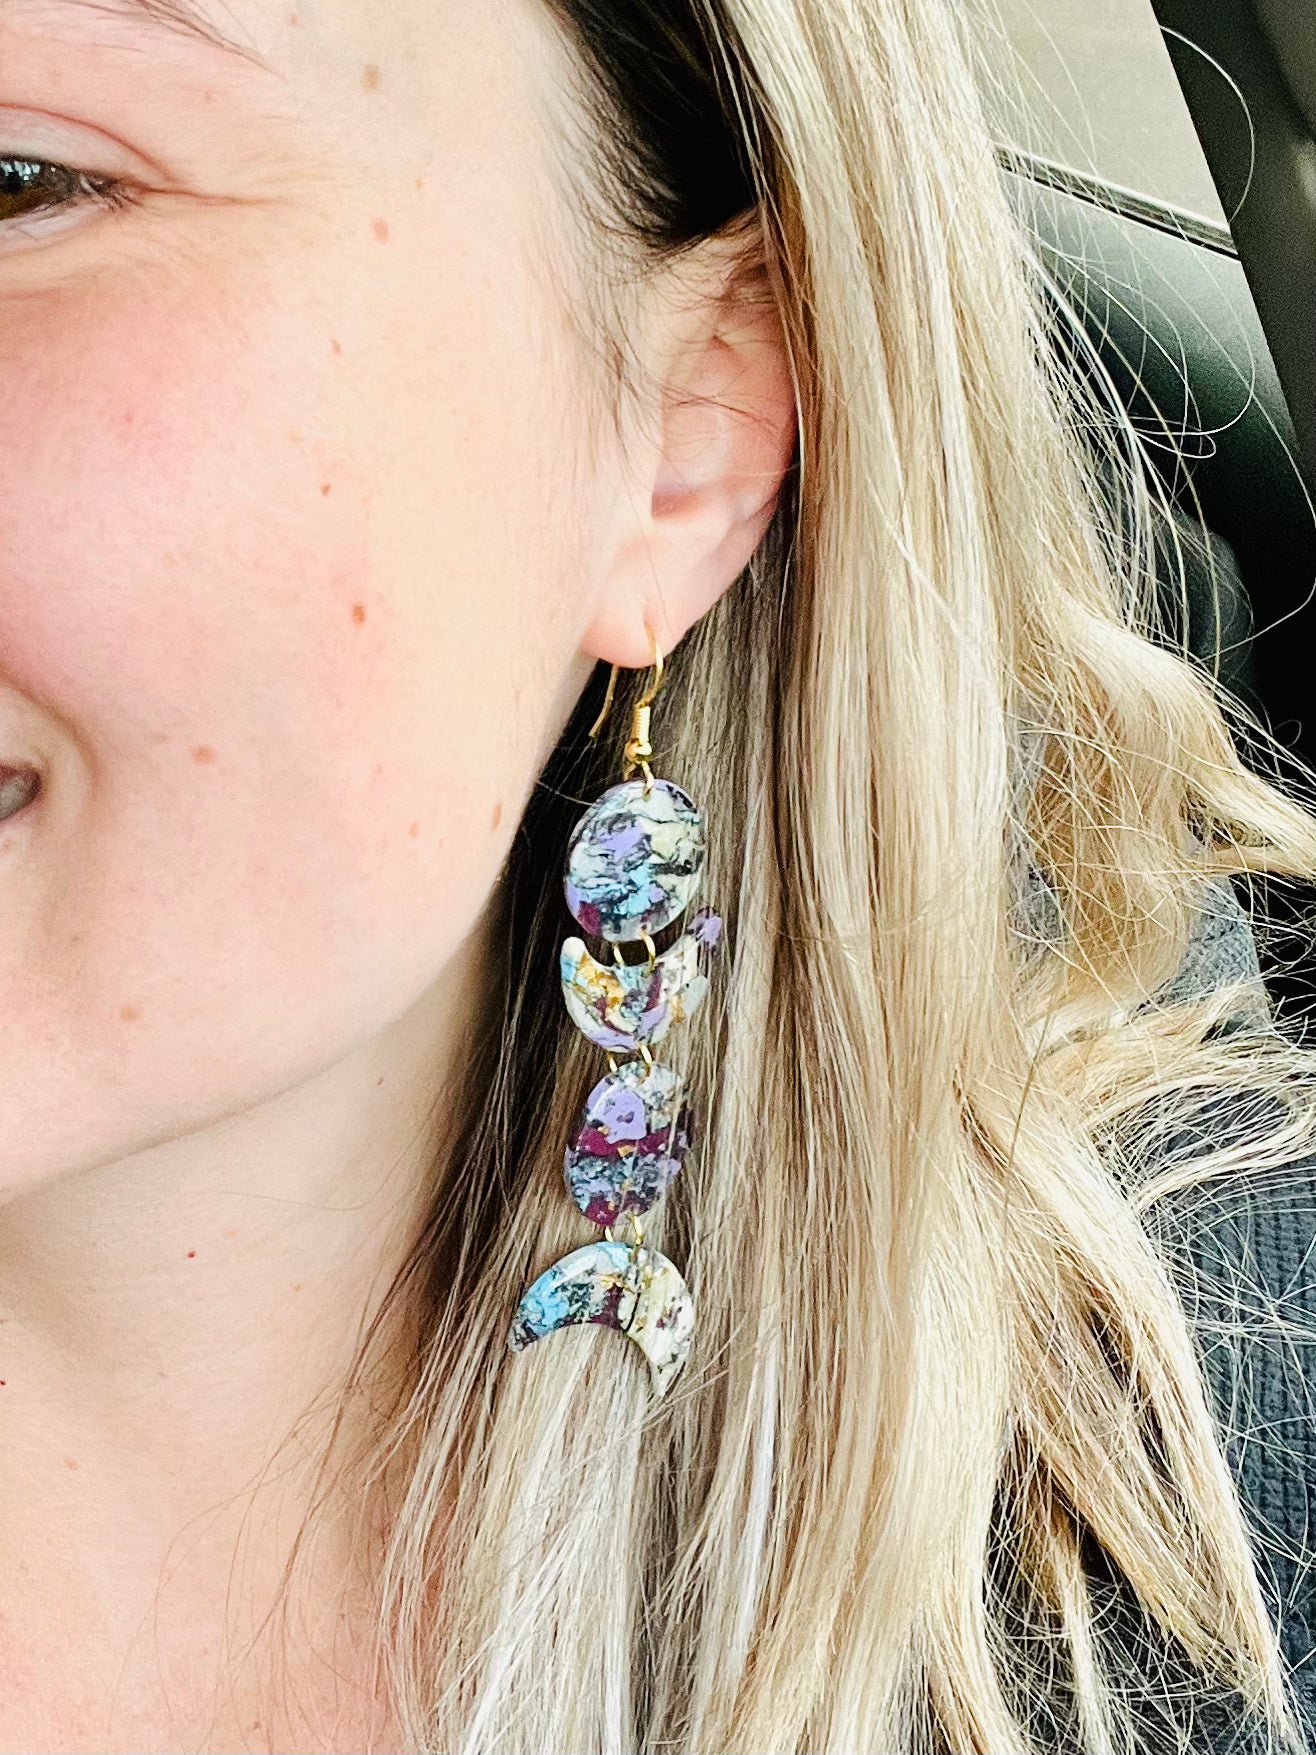 Capture the essence of life's journey and feminine energy with these earrings. New Moons mark new beginnings, while waning crescents offer a chance to release desires into the universe